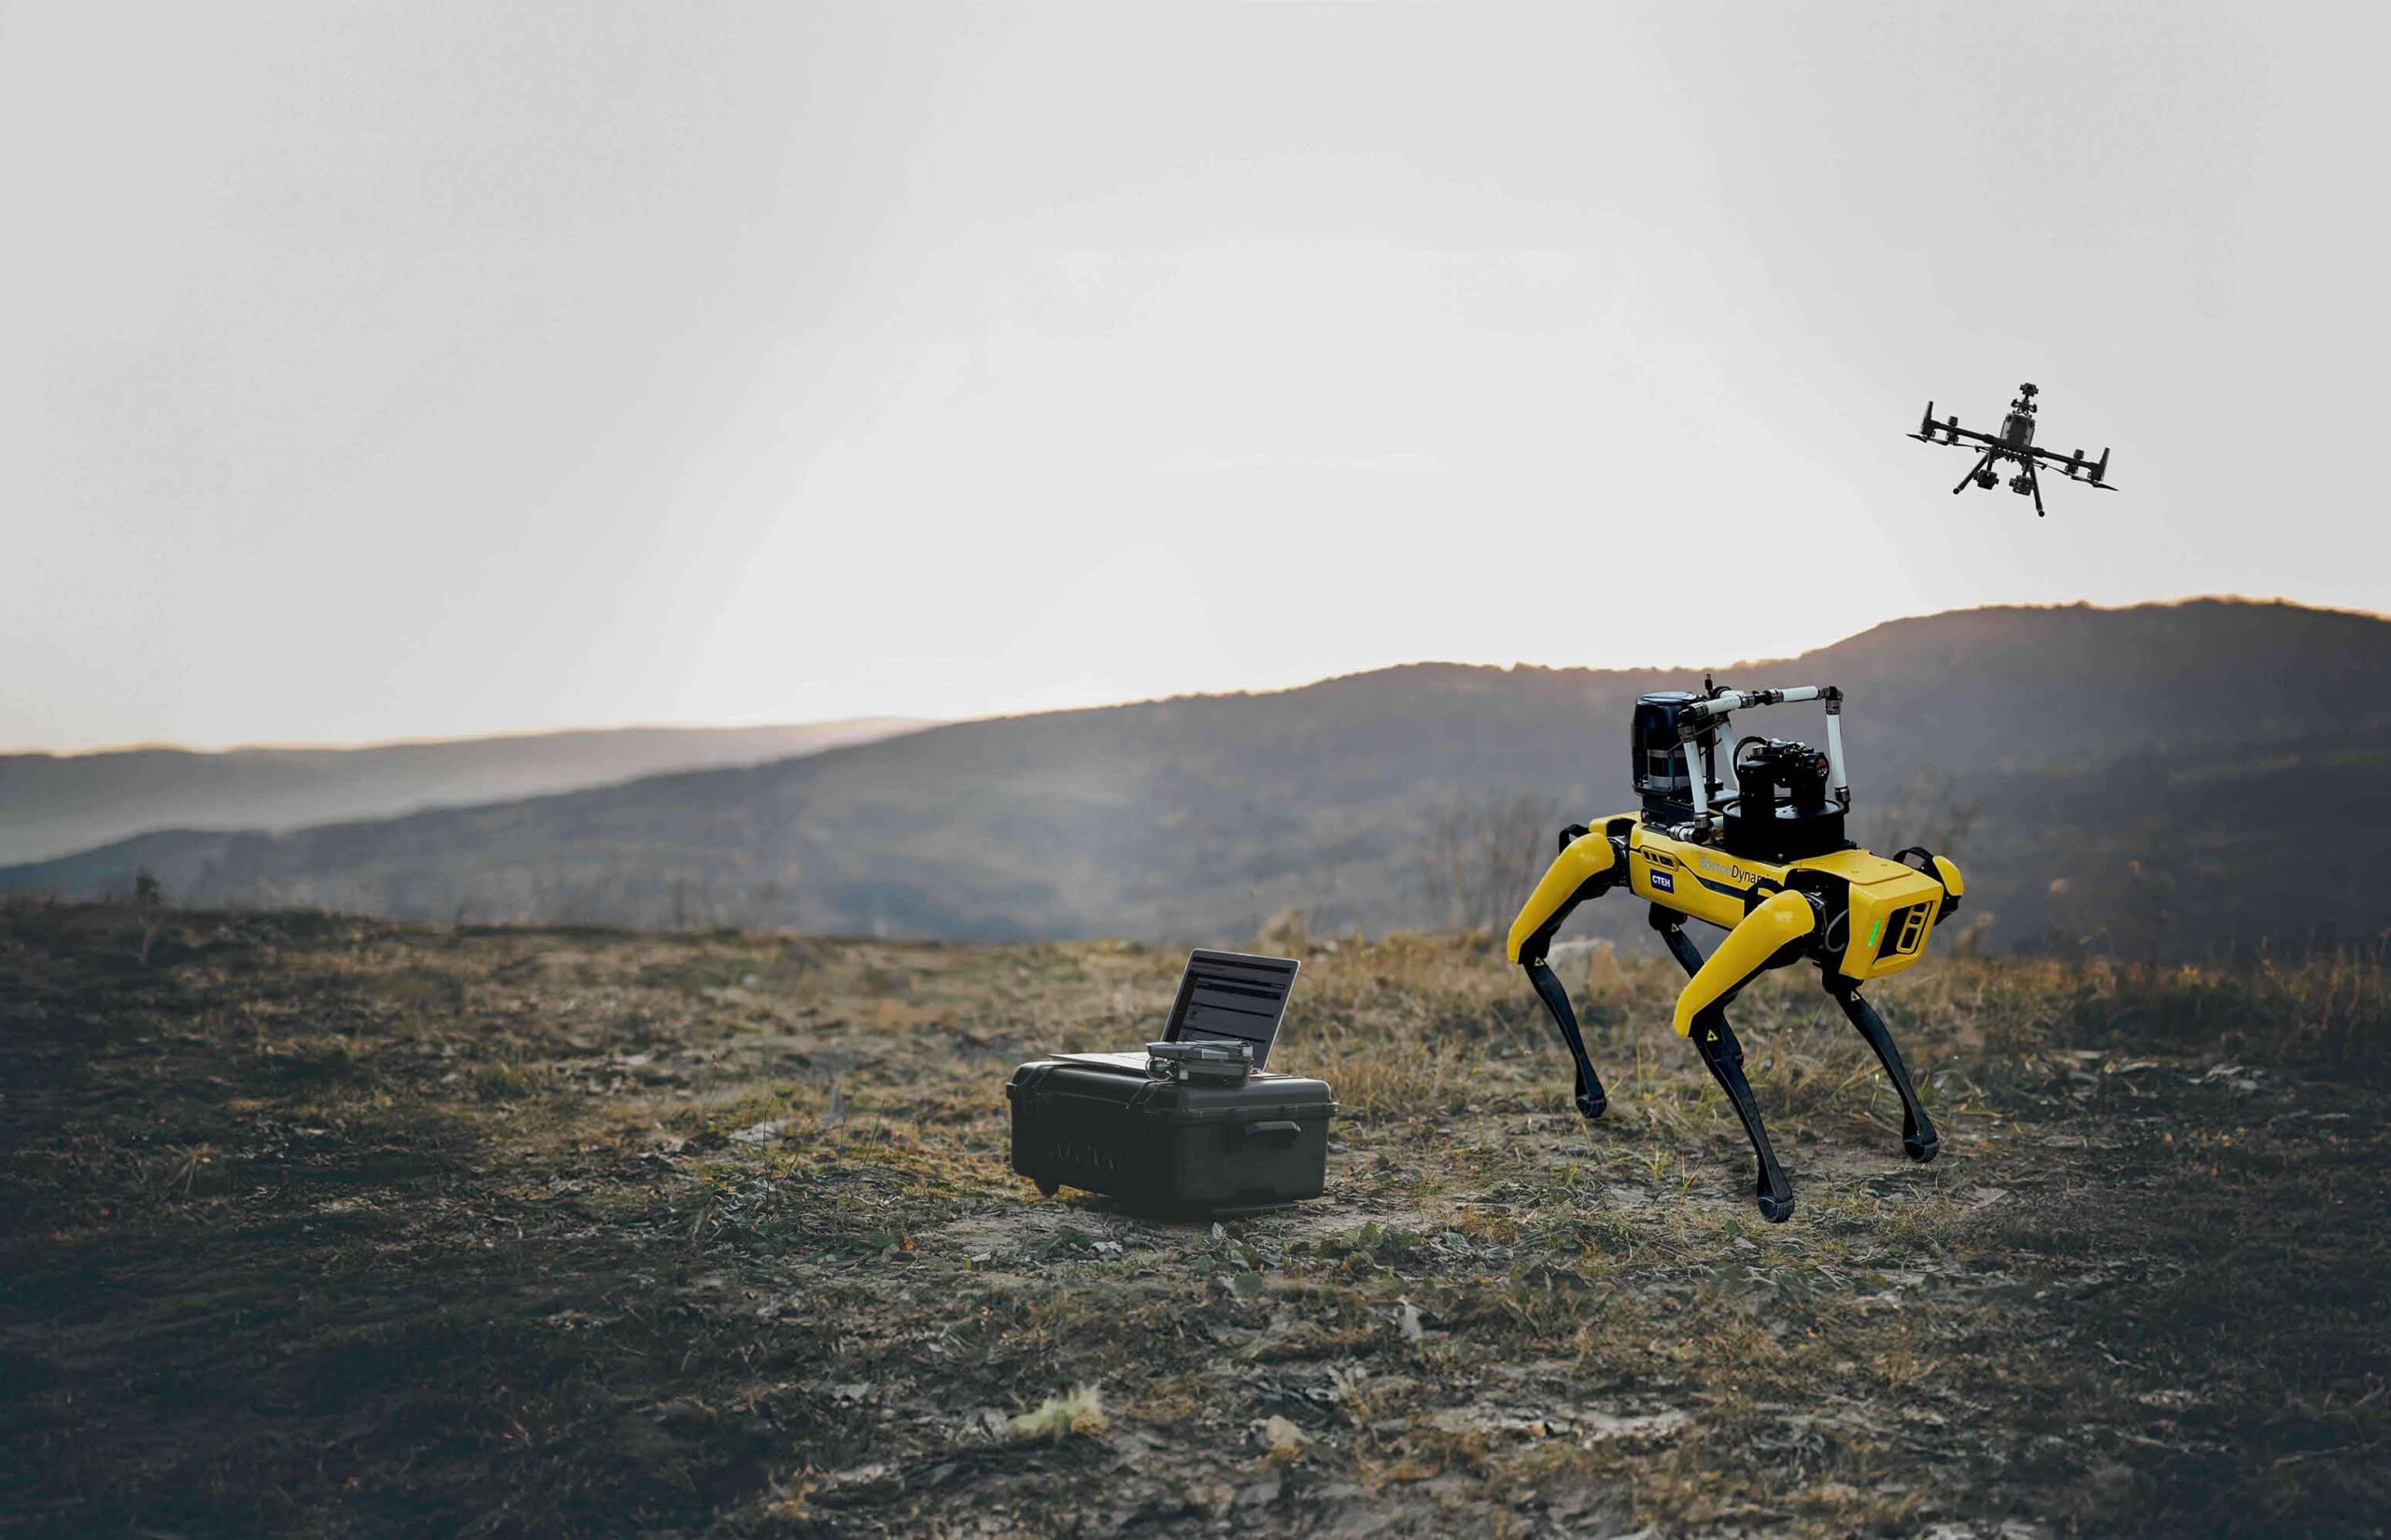 A yellow, four-legged robot stands on a barren landscape next to an open black case with electronic equipment, showcasing technological solutions, while a drone flies in the background against a backdrop of hills and a hazy sky.